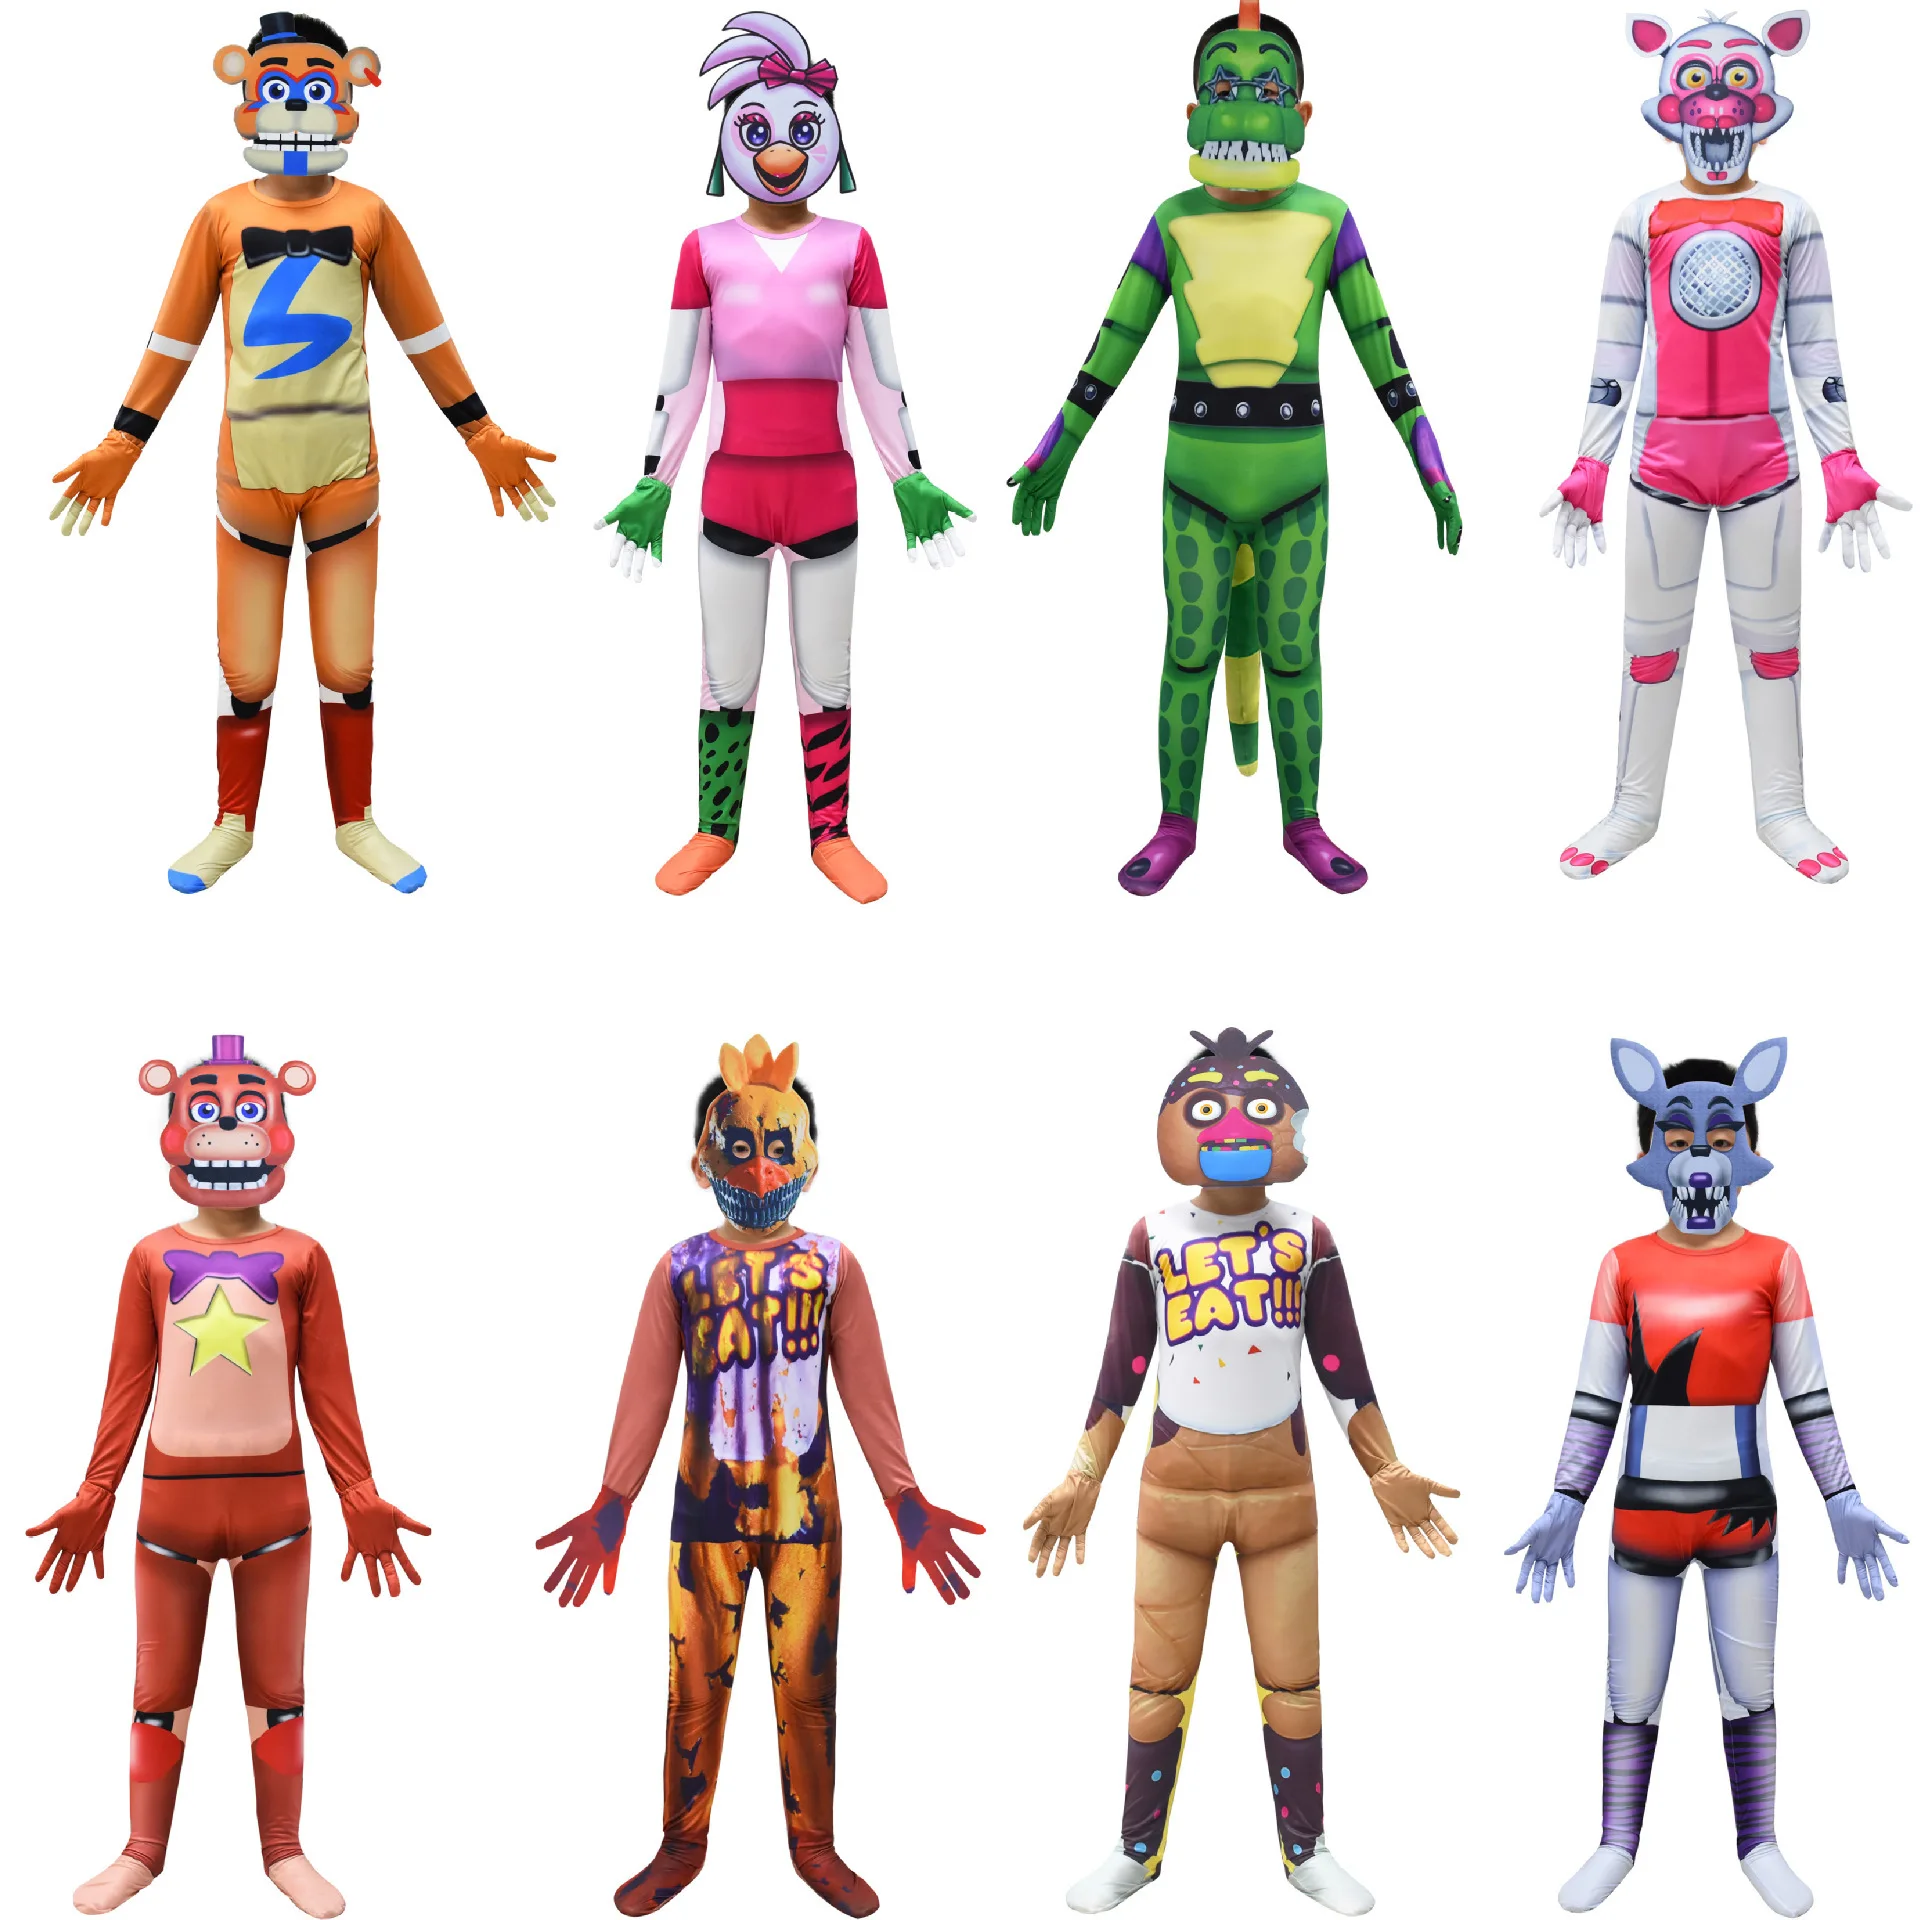 Scary Game Five Nights At Freddyed Cosplay Costume Jumpsuit with Mask Fnaf Freddyed Anime Birtyday Gift for Kids Halloween Suit